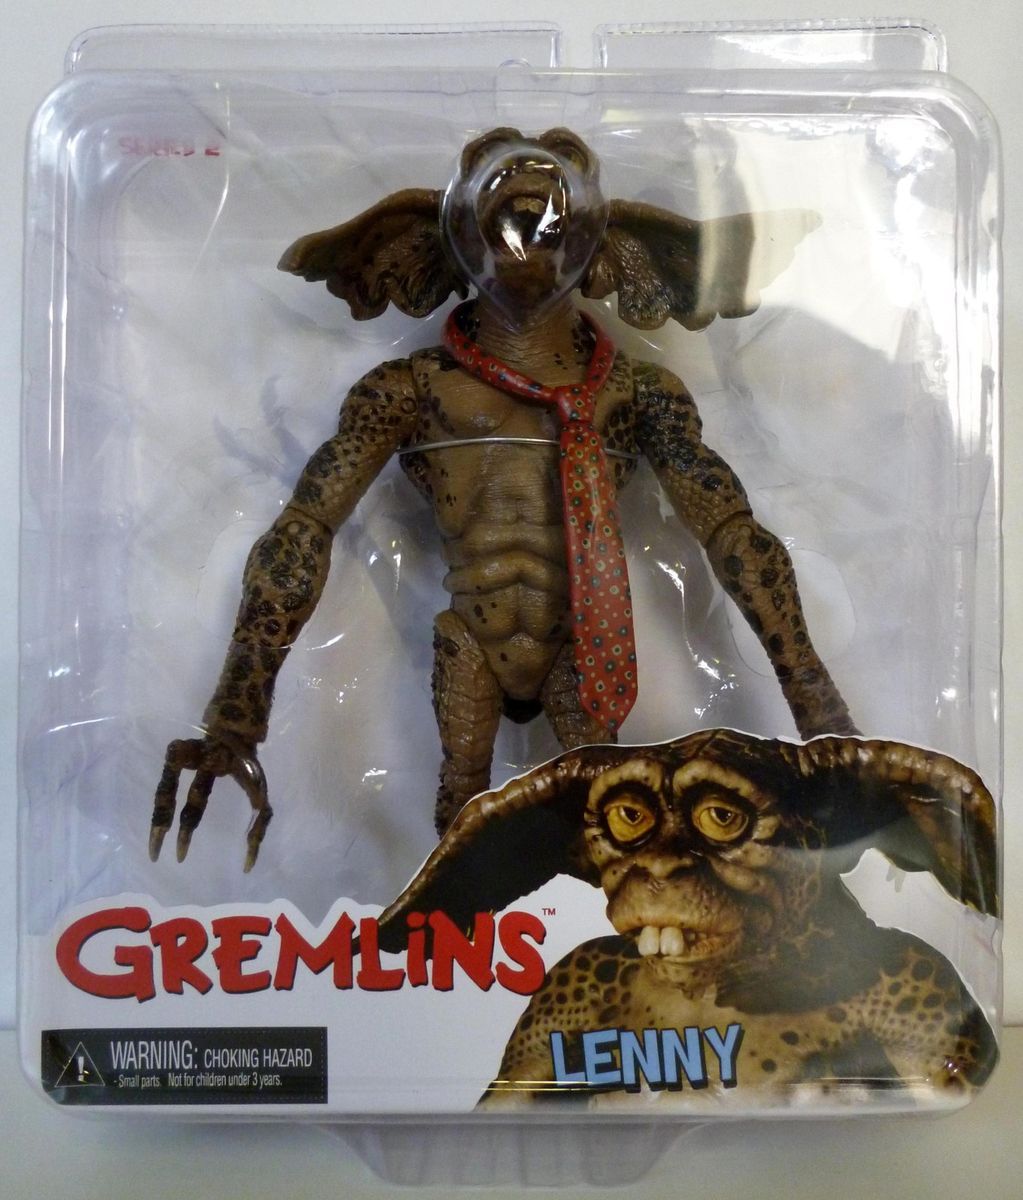 Lenny Gremlins Movie 6 inch Action Figure Series 2 NECA 2012